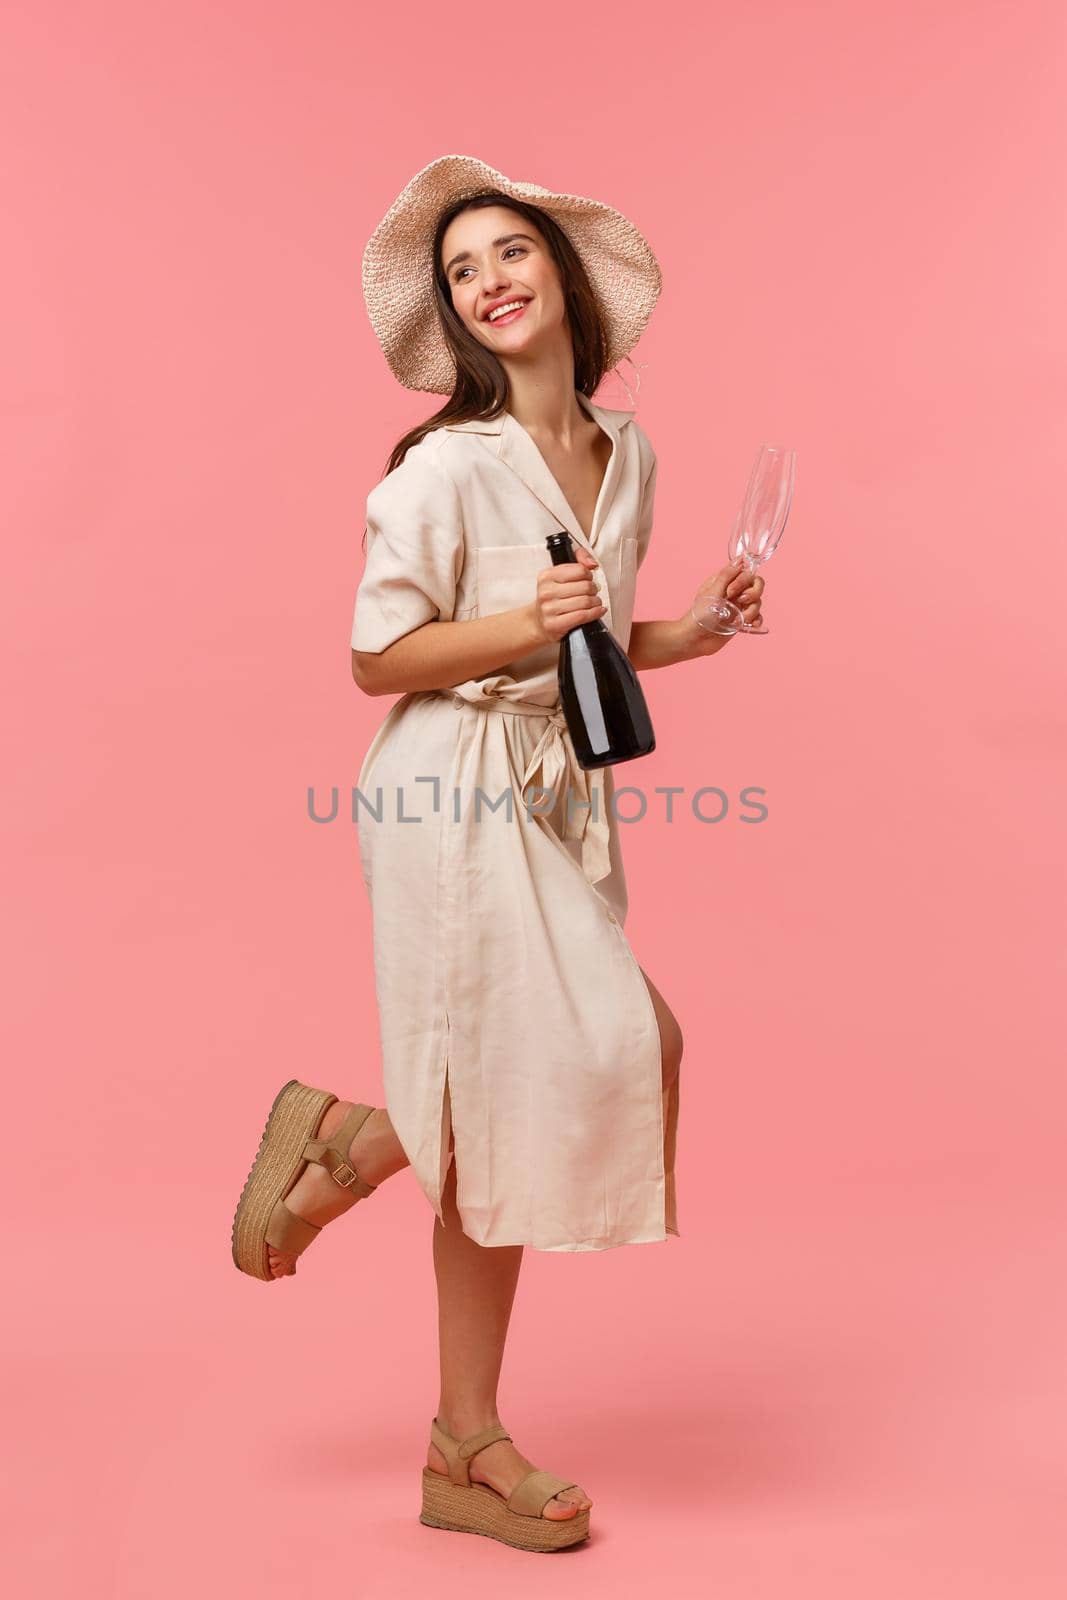 Full-length vertical shot woman on picnic, going out with girlfriend on fine sunny day in hat and dress, rushing with bottle champagne and glasses, smiling happily, standing pink background.